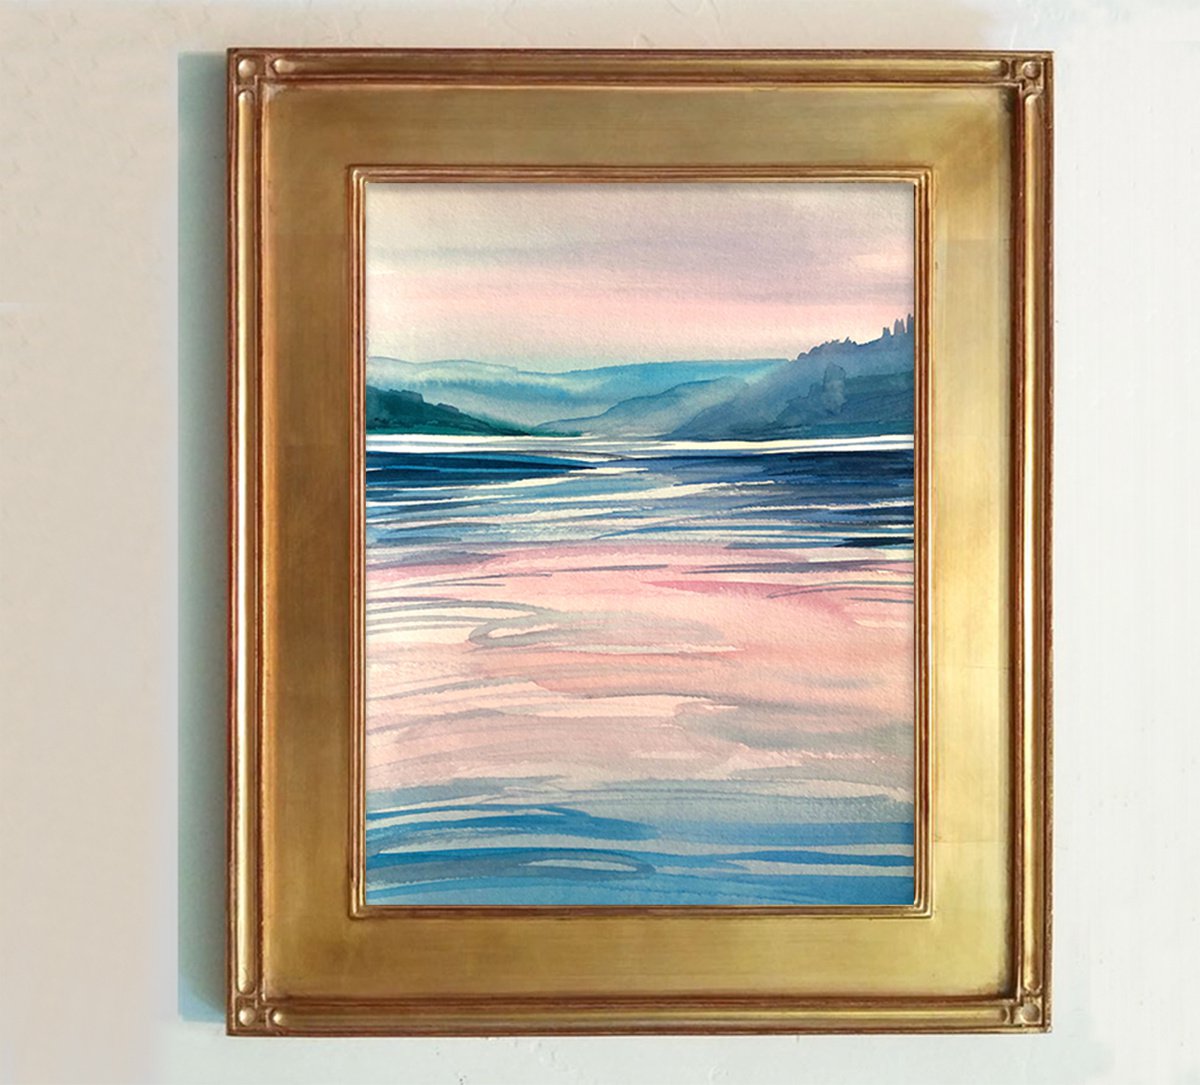 PINK SUNRISE ON WATER, Original Impressionist Vertical Landscape Watercolor Painting by Nastia Fortune